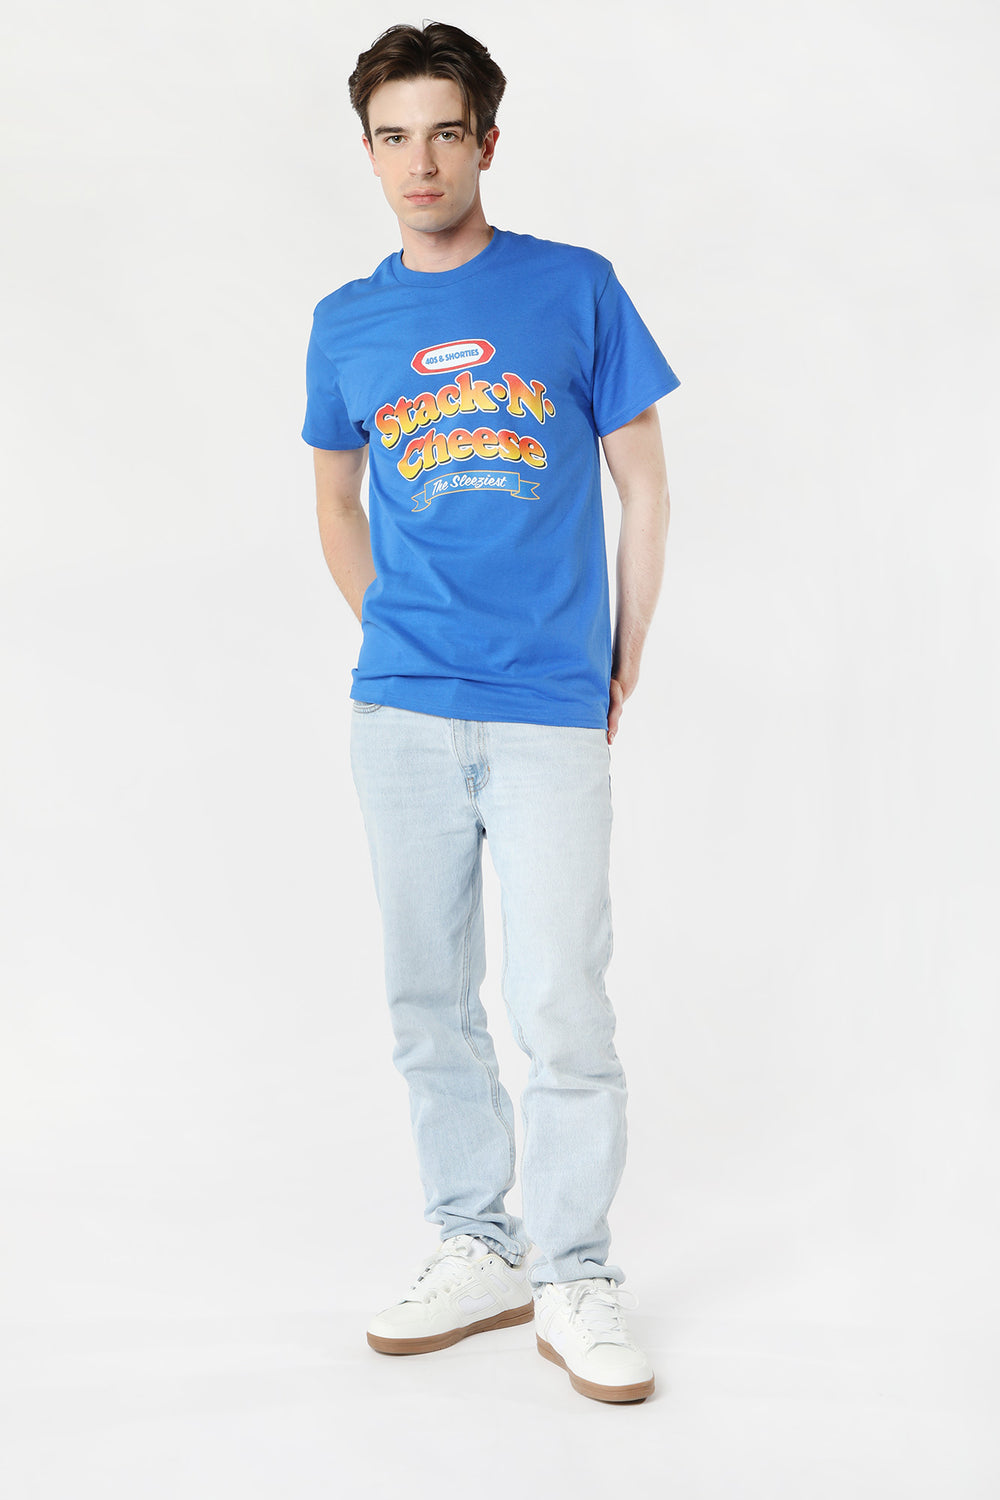 40s & Shorties Stack N Cheese T-Shirt Blue